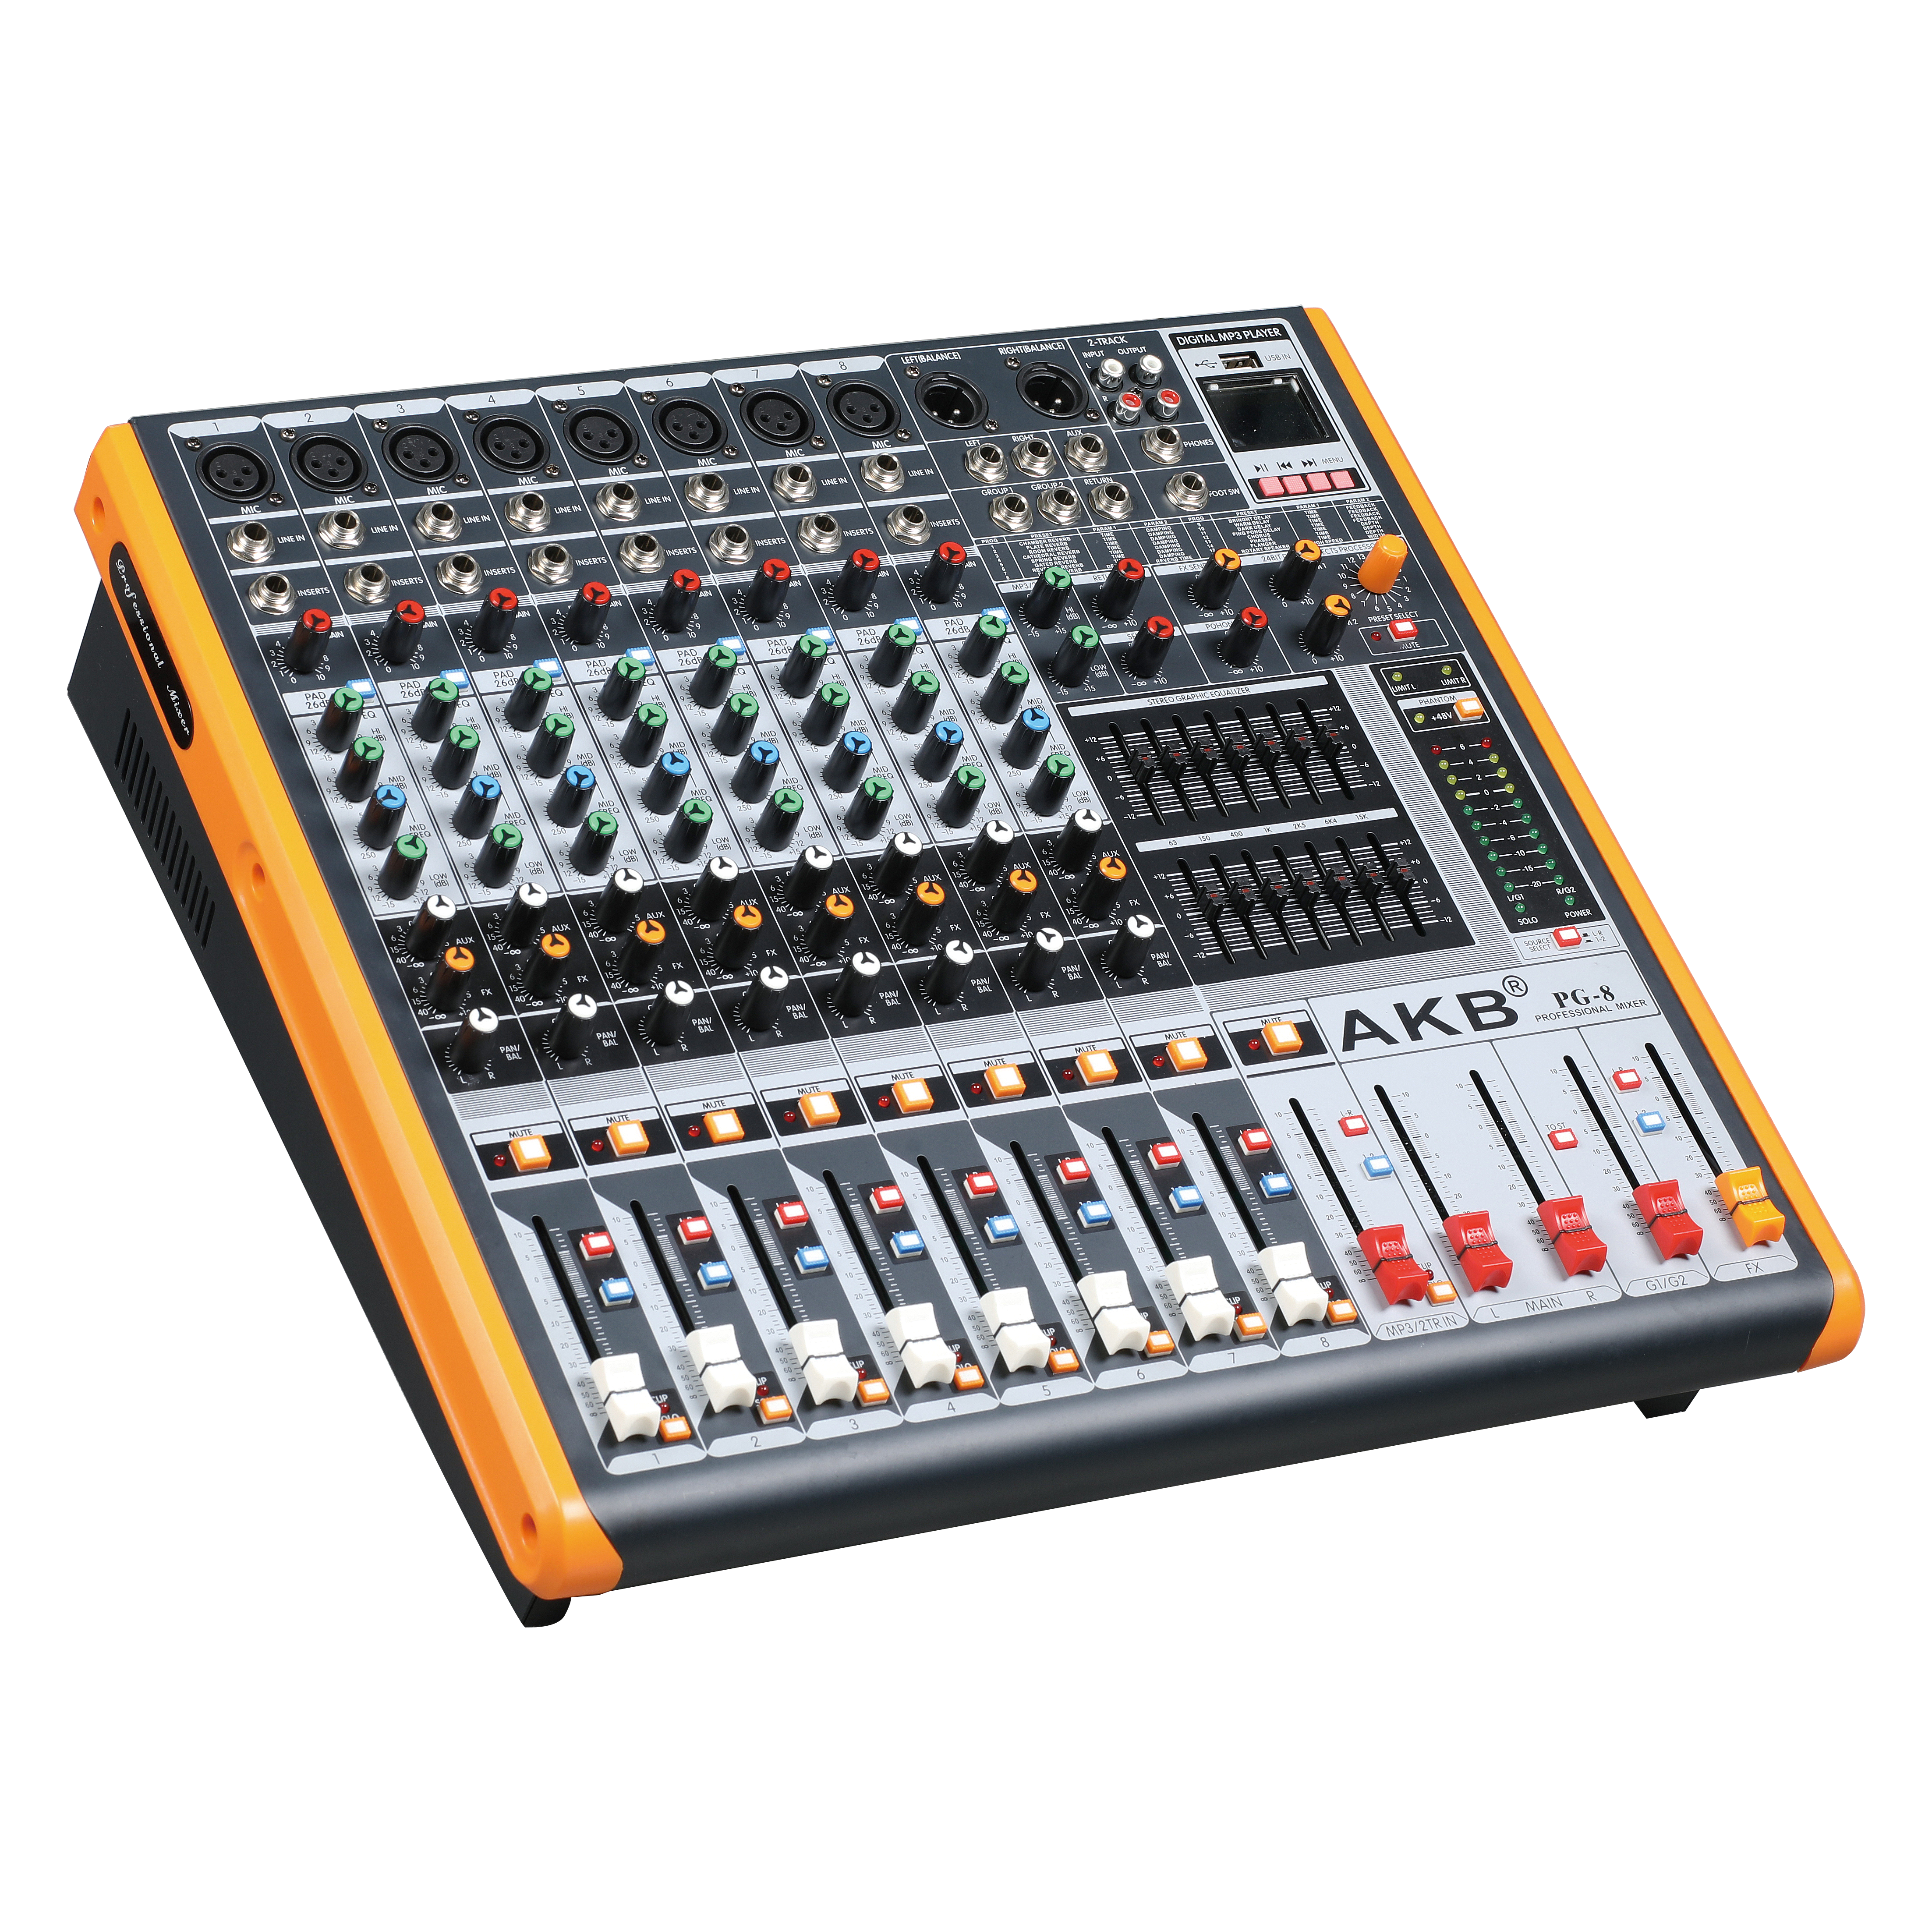 PG-8 professional 8 channel with Double 32 DSP audio mixer